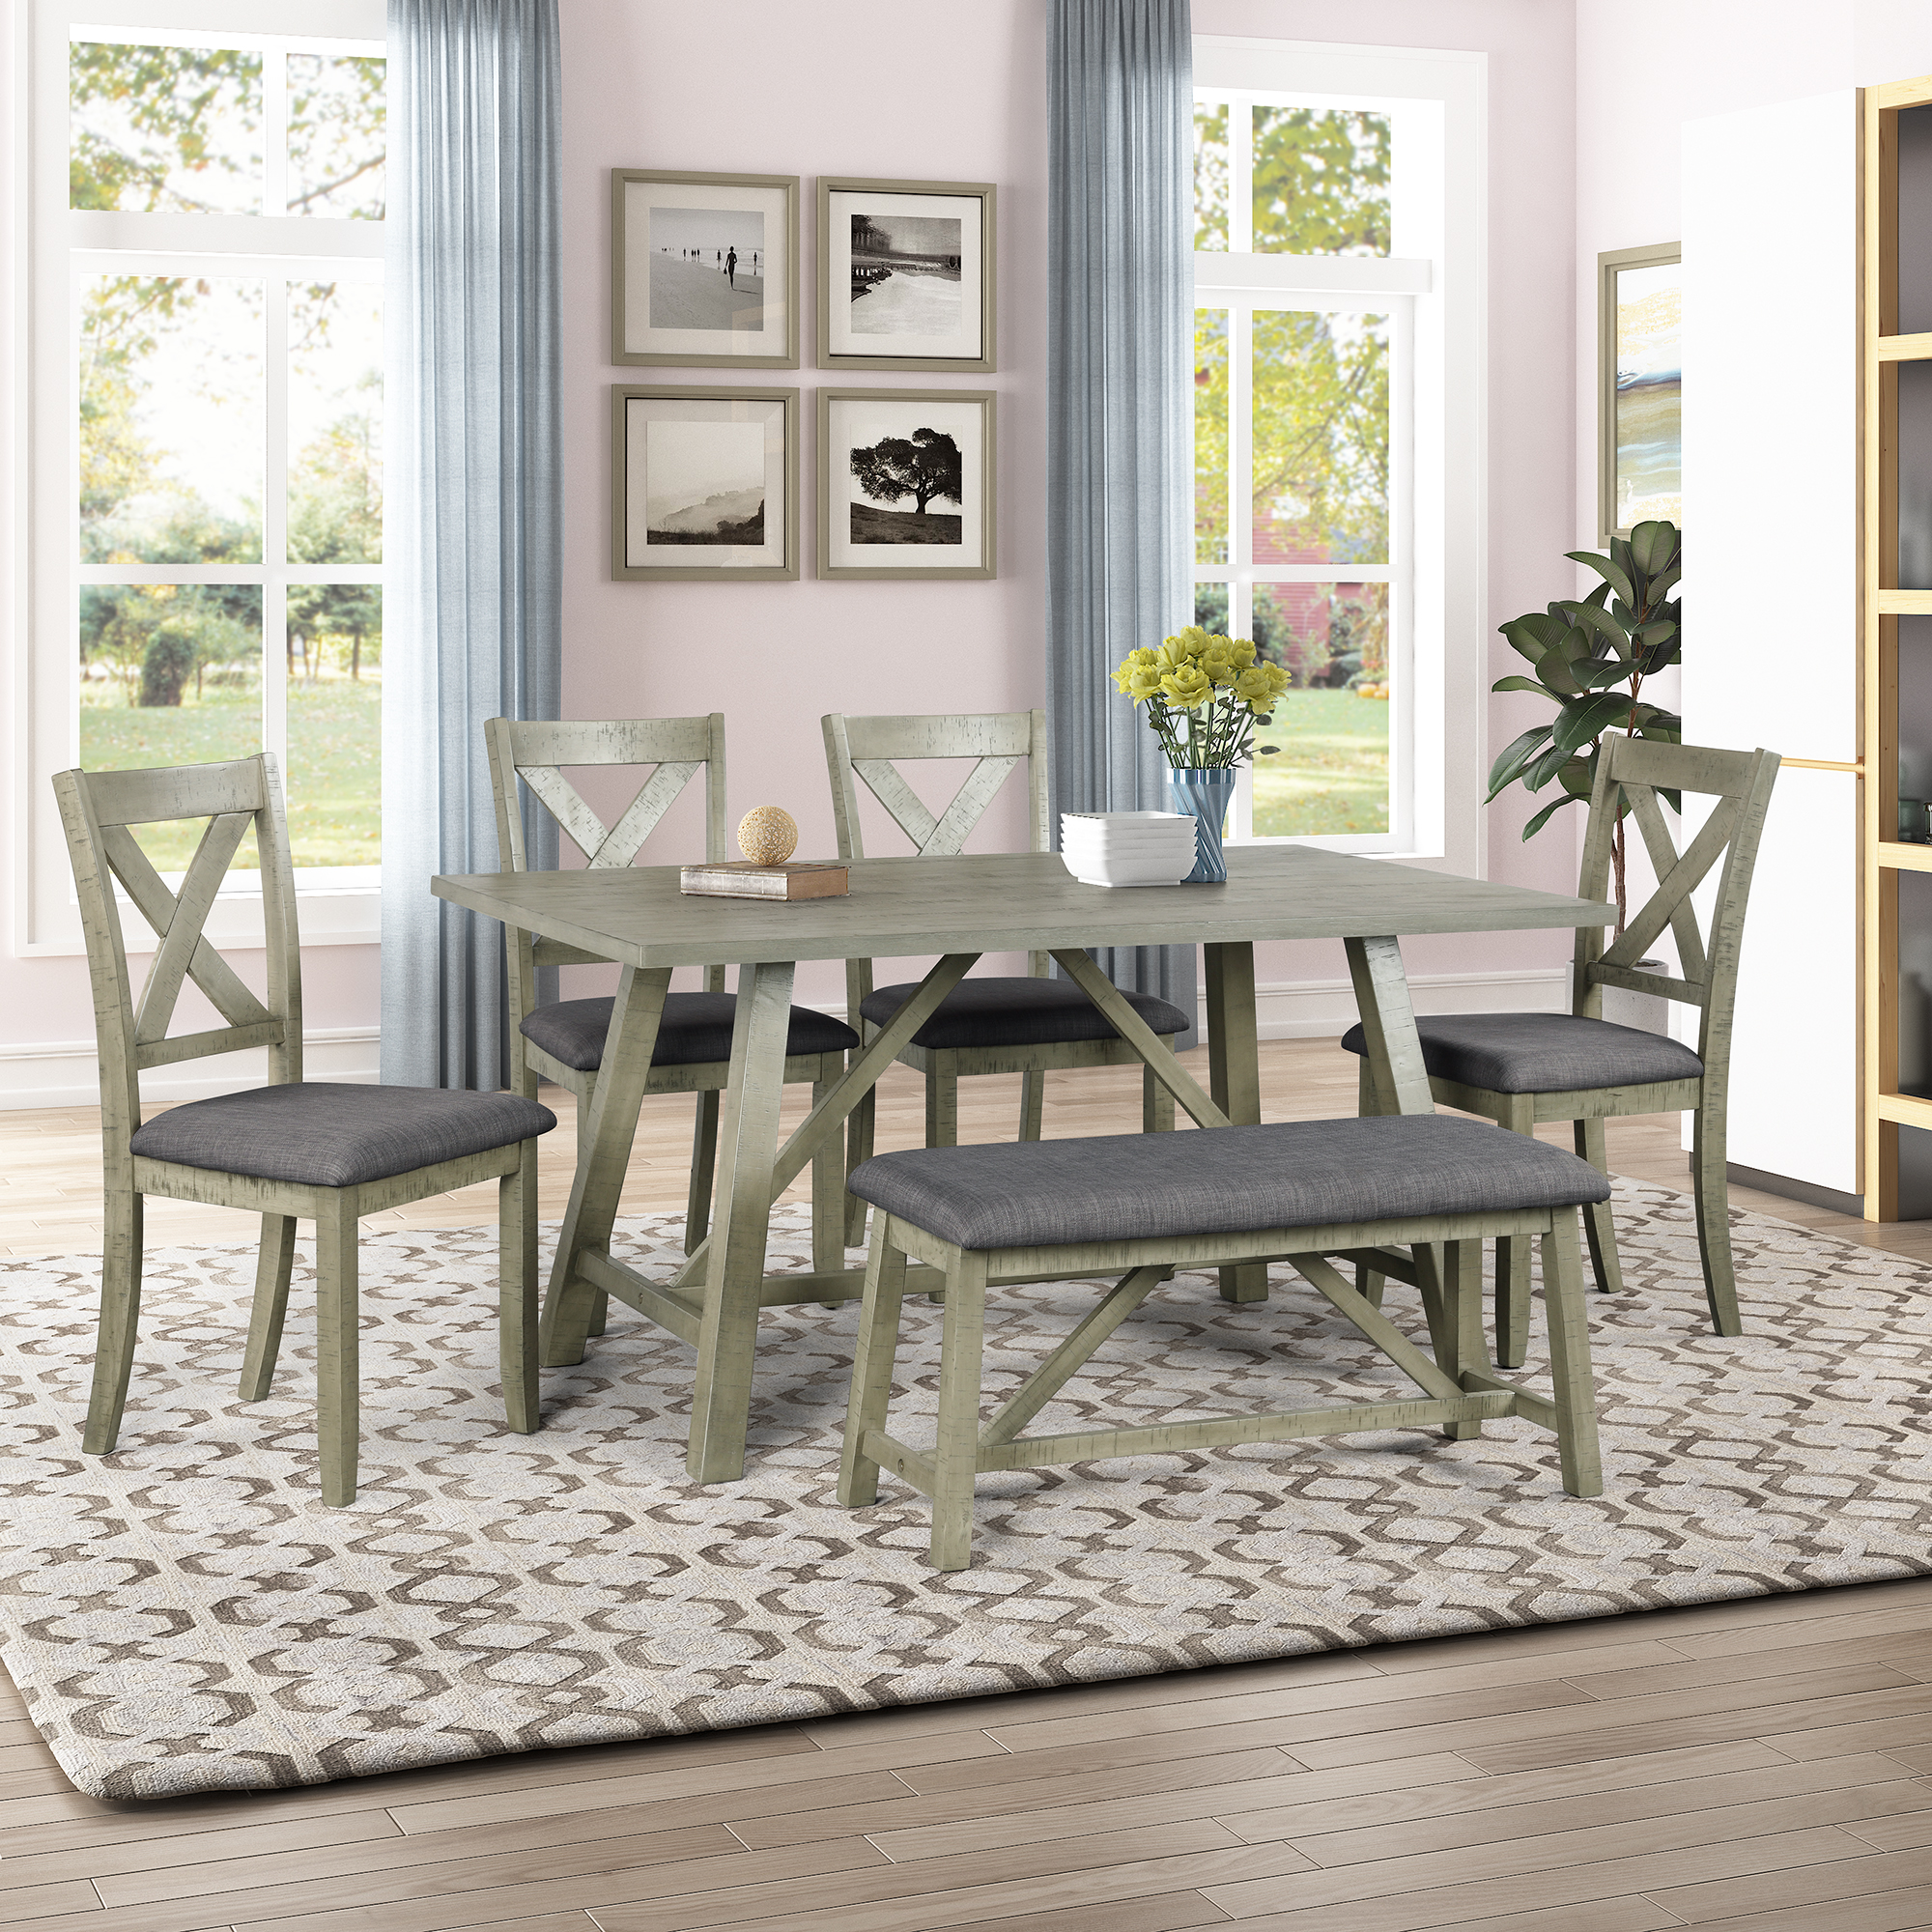 Moda Furnishings 6 Piece Dining Table, Gray Dining Room Table Set For 6